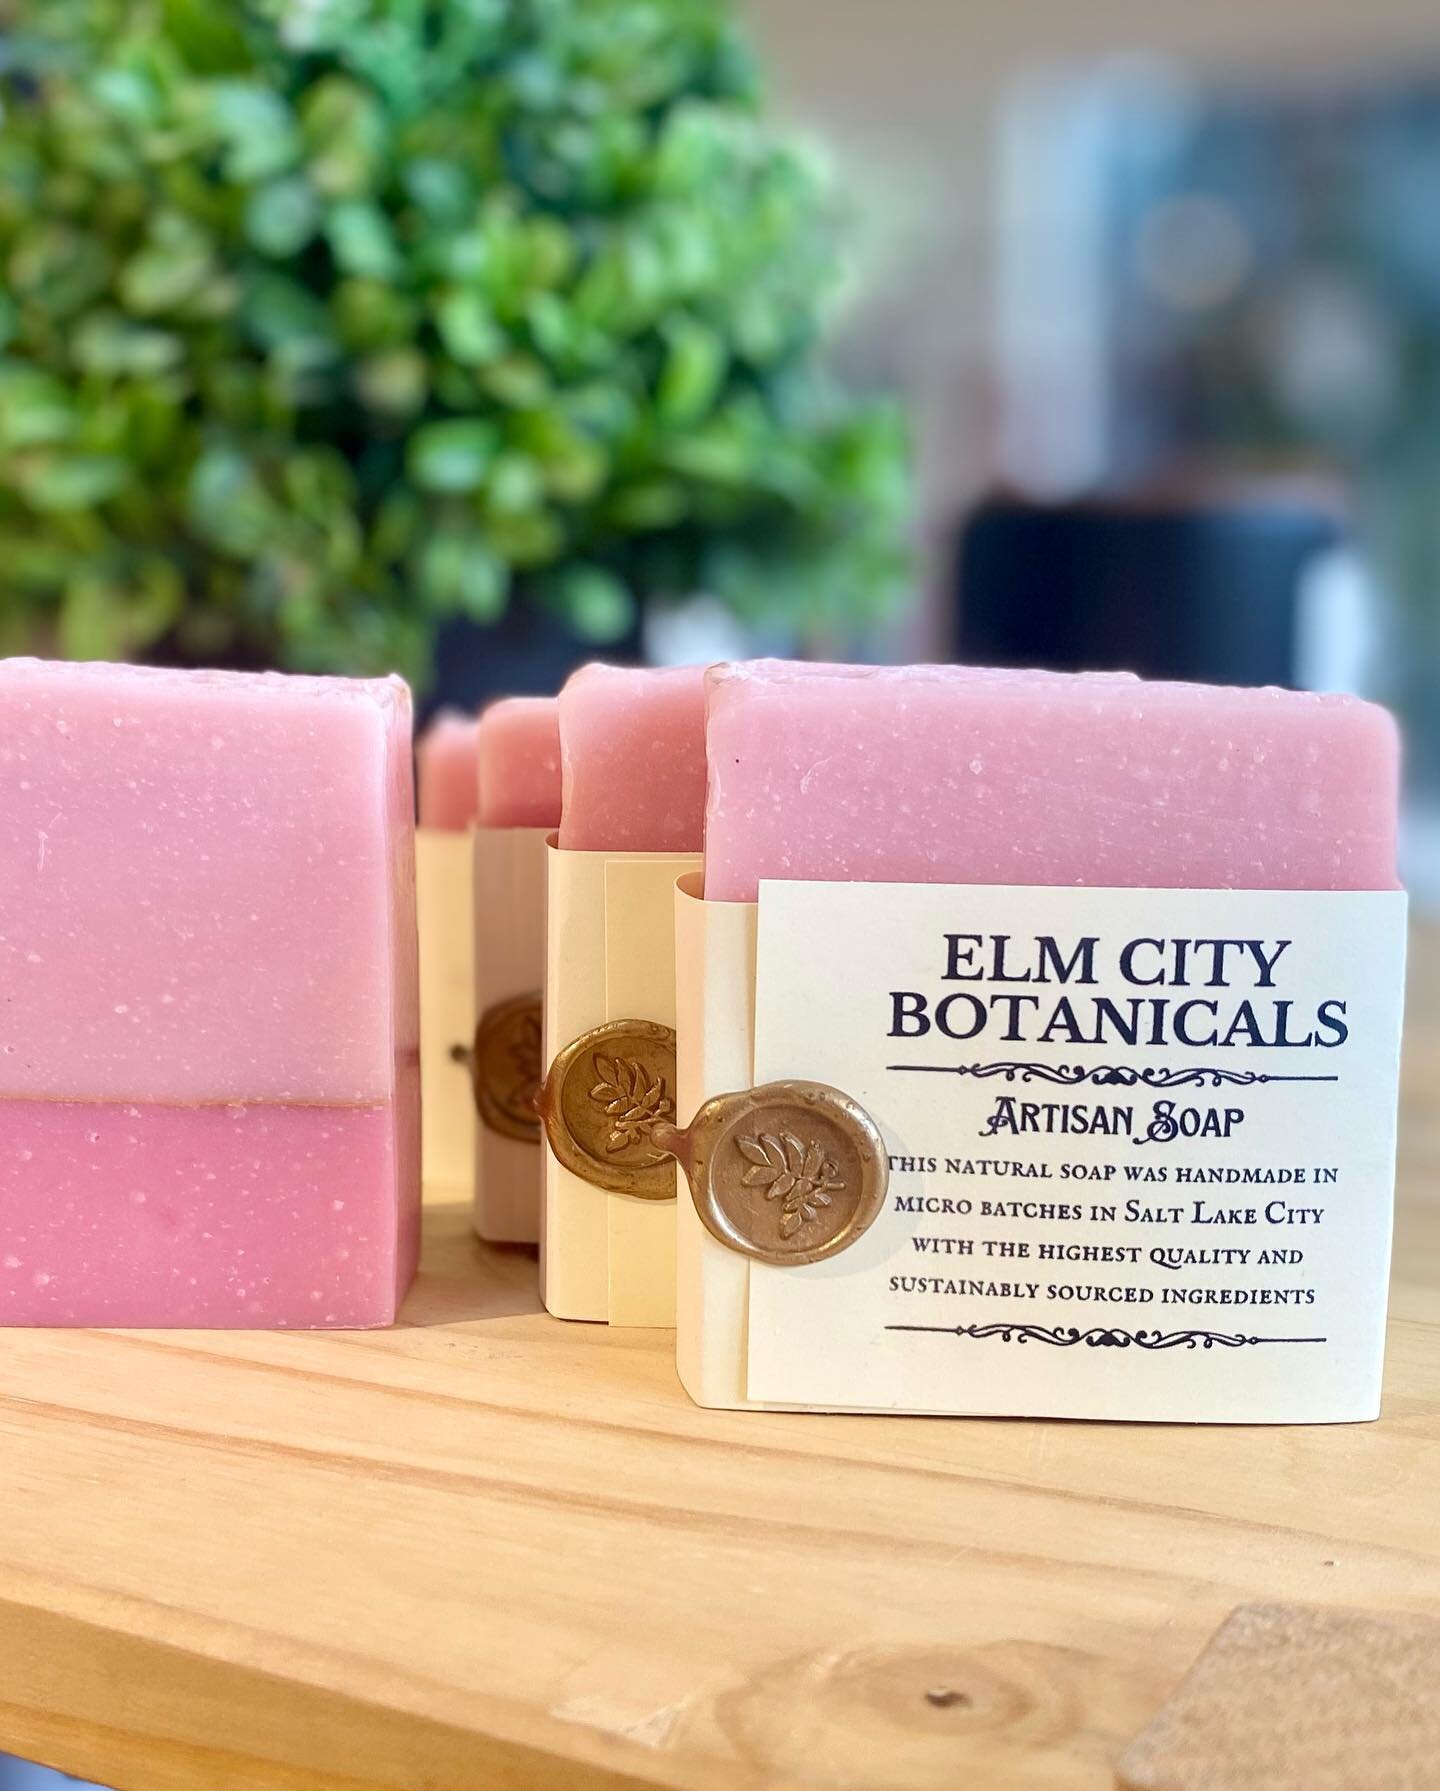 @elmcitybotanicals is a one-woman natural soap and candle shop run by Annabelle, a PhD student in SLC. Annabelle makes all of her soaps and candles the old-fashioned way - by hand in small batches with natural, sustainable, and high quality ingredien